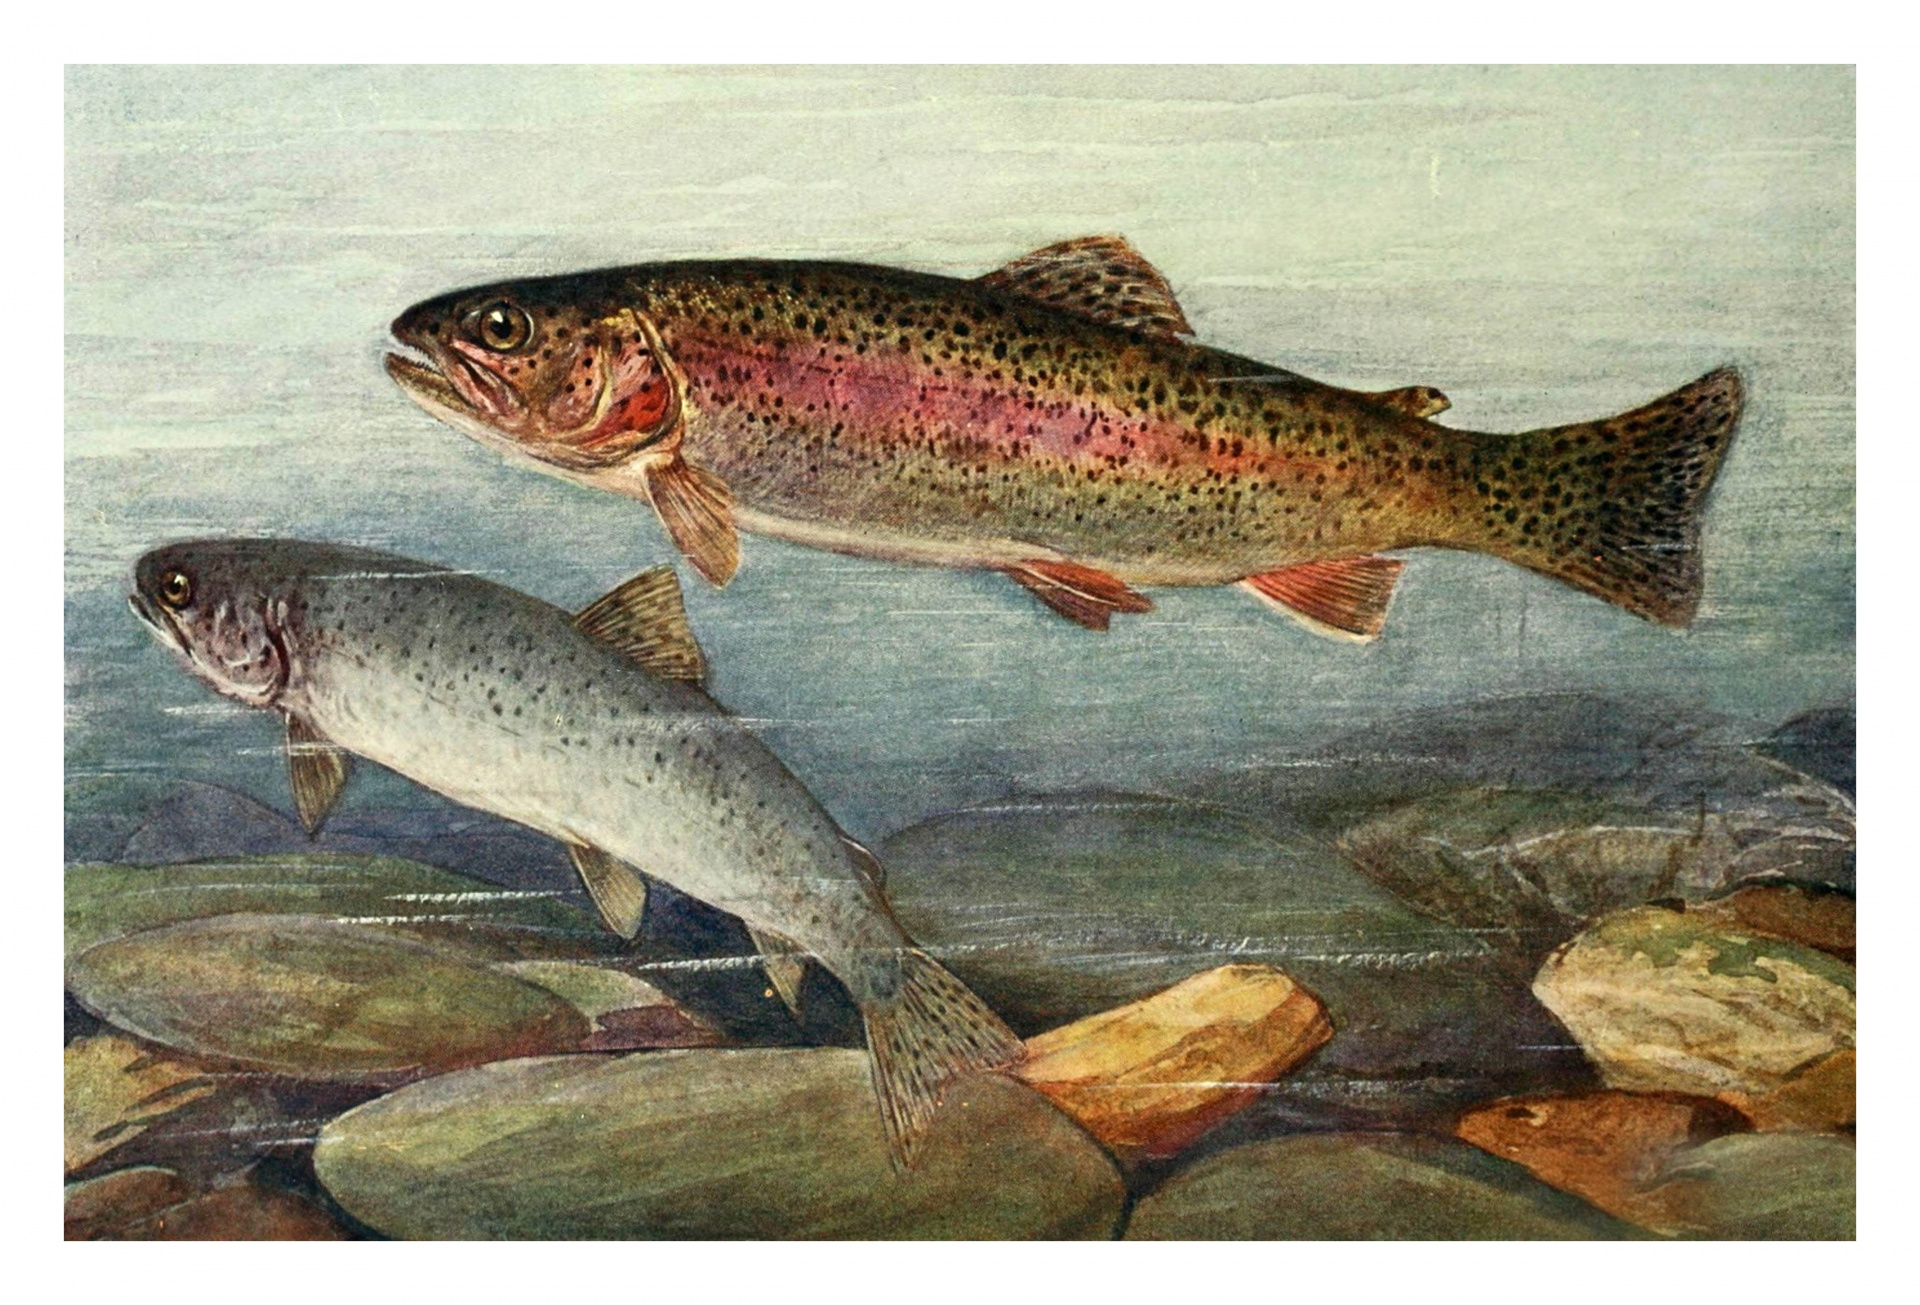 Trout freshwater fish fish vintage art 1900 century illustration painted novella river brook body of water nature fishing game fish retro poster poster